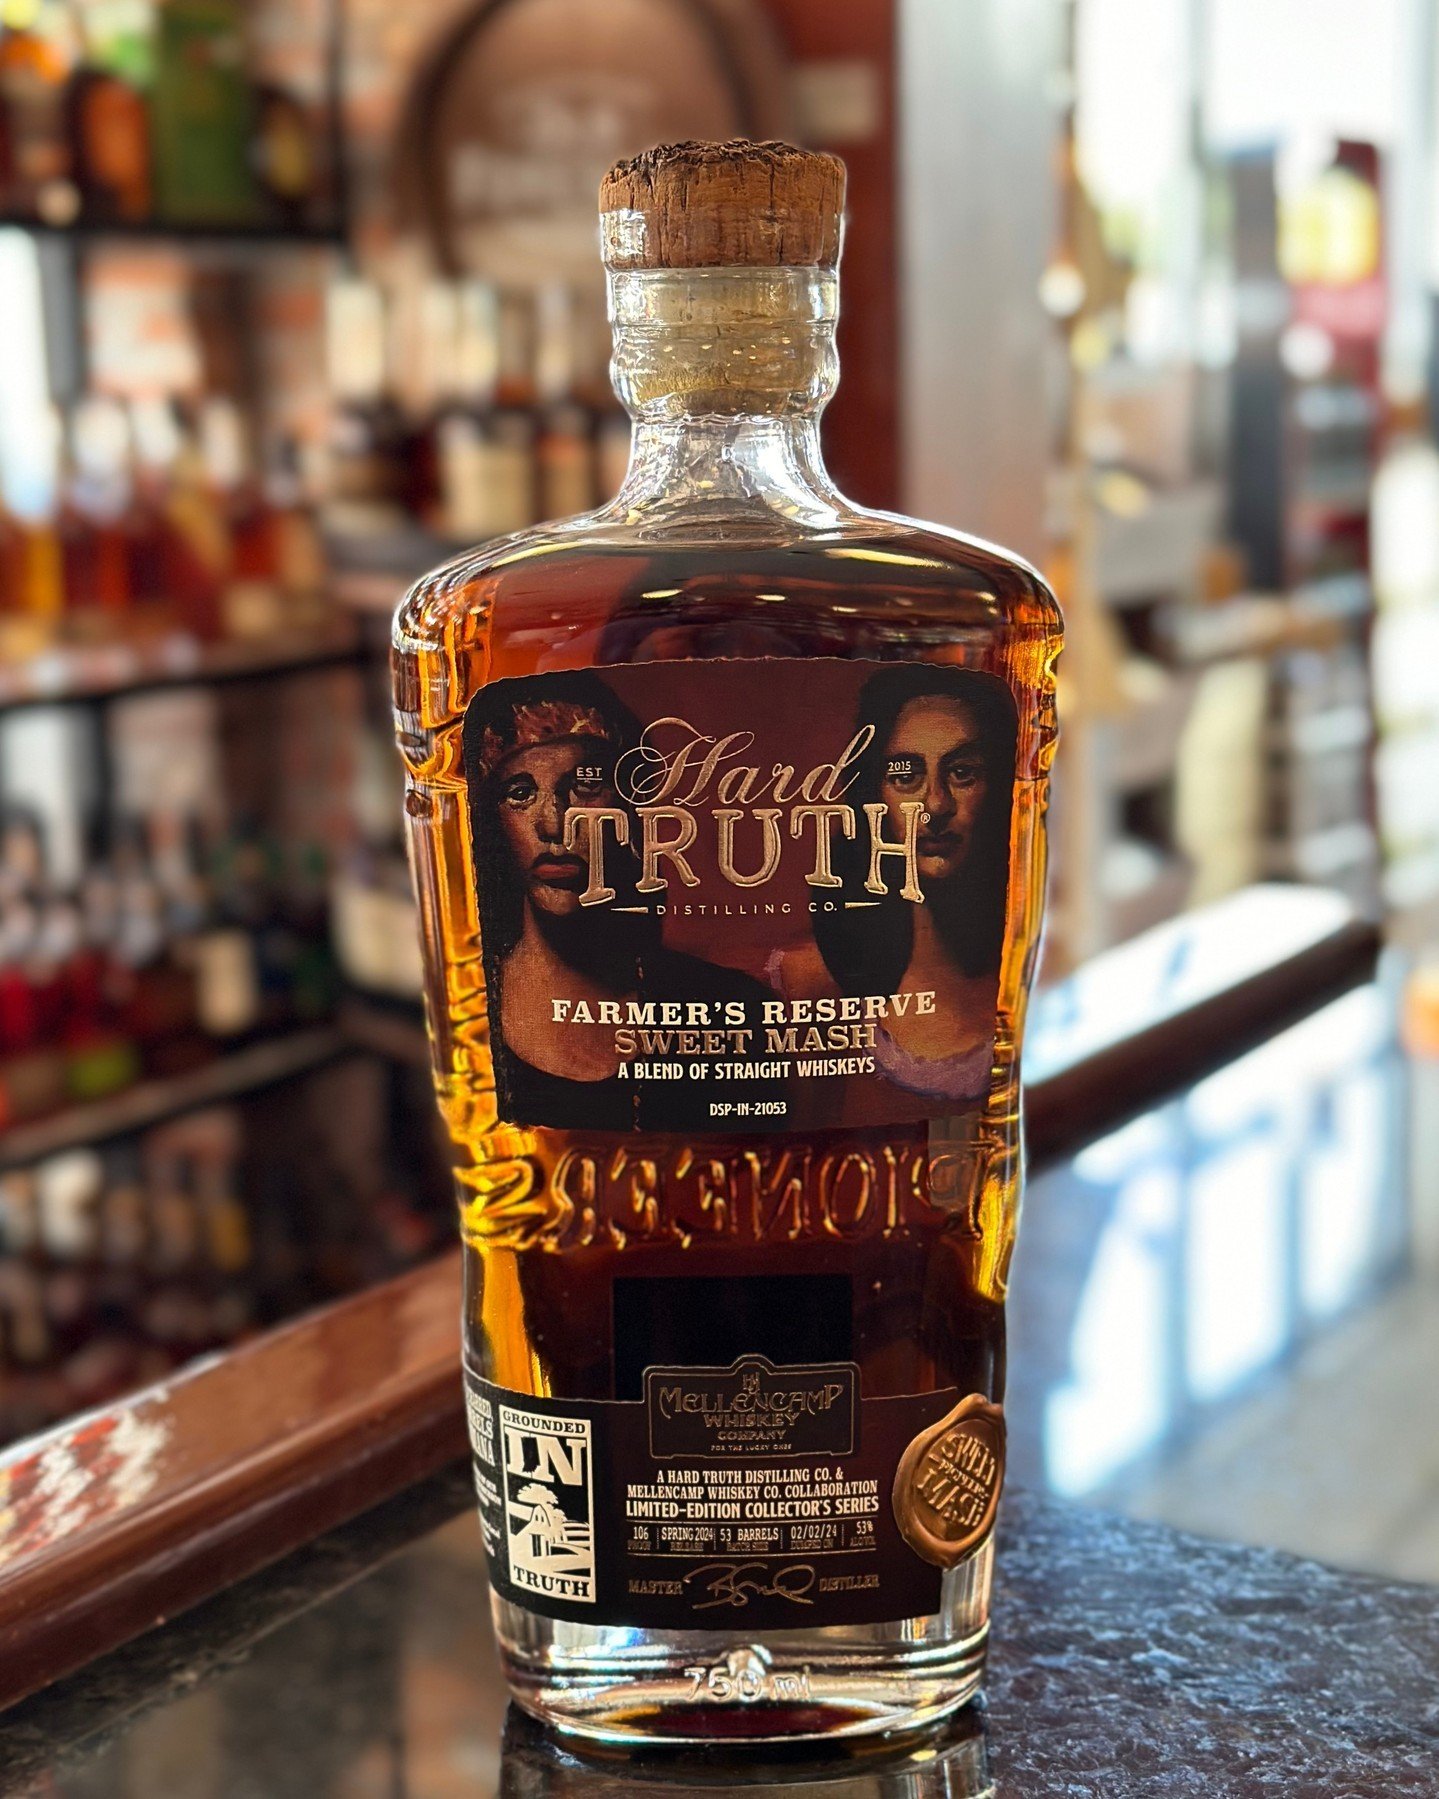 New Arrival: Hard Truth Farmer's Reserve Sweet Mash. Very limited!